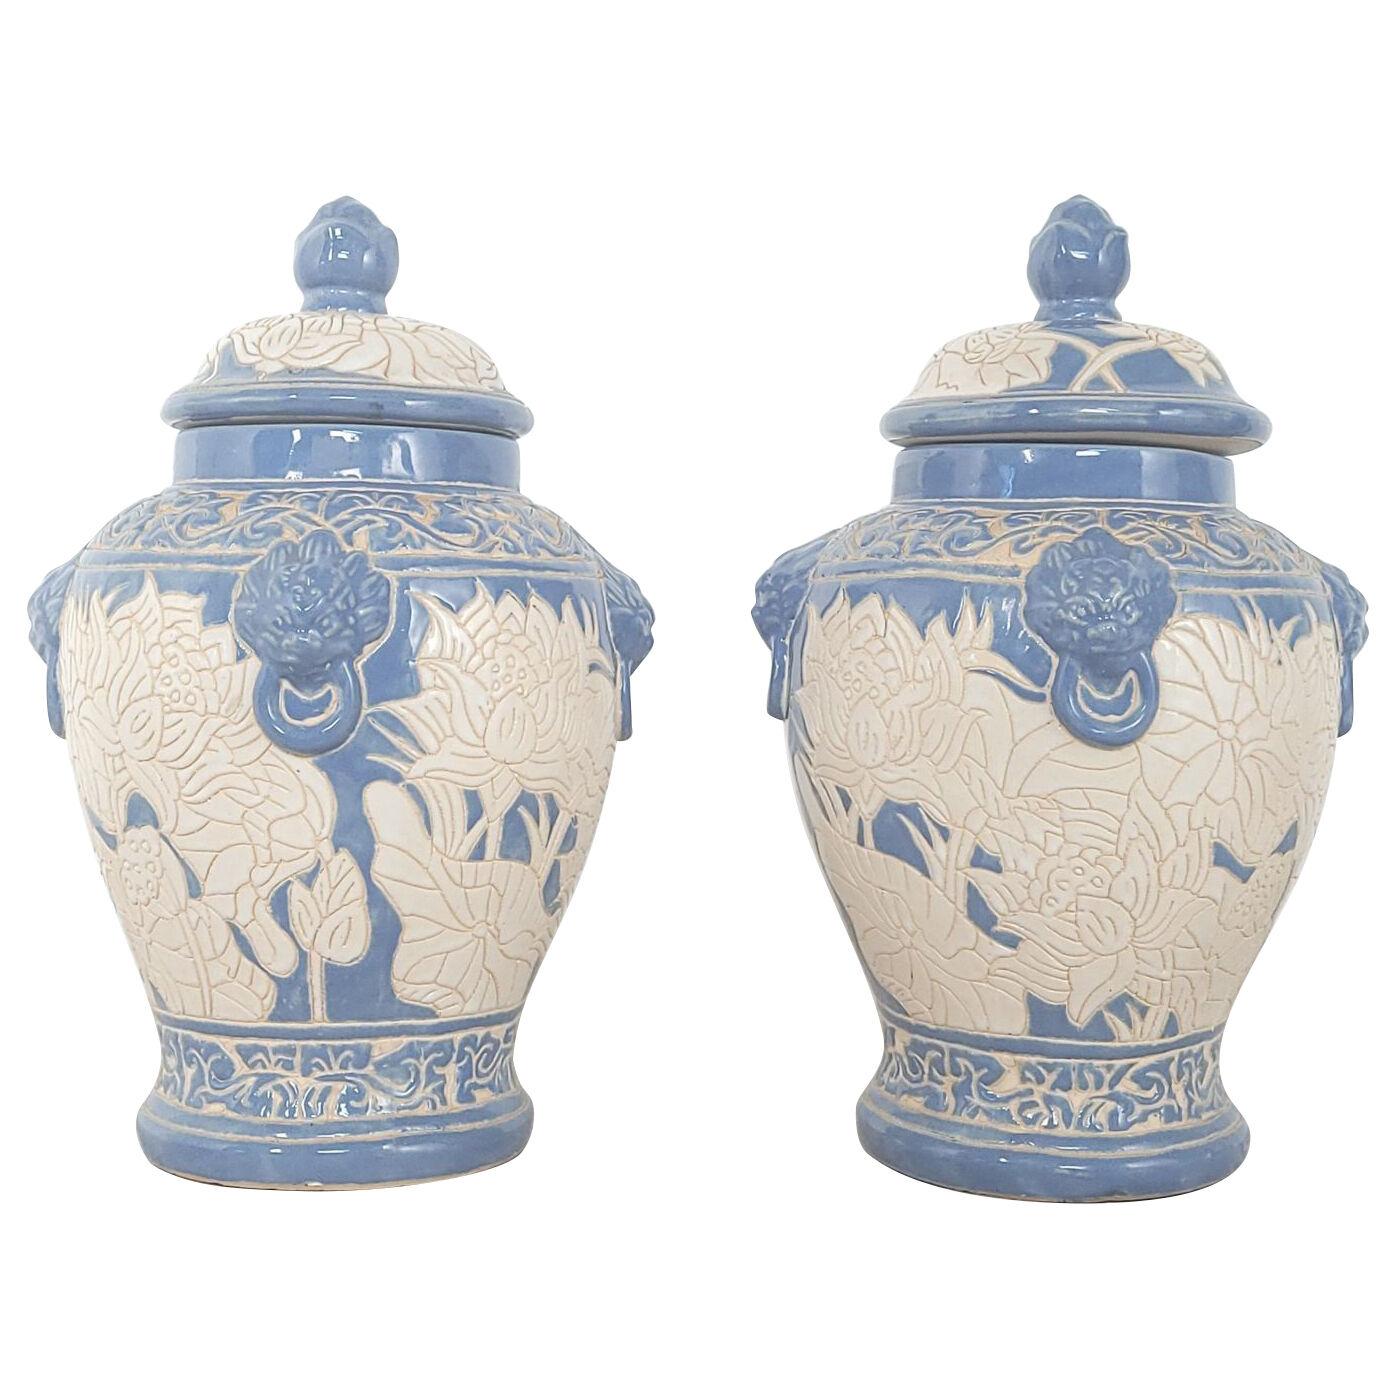 Pair of Probably Russian Early 20th Century Covered Vases